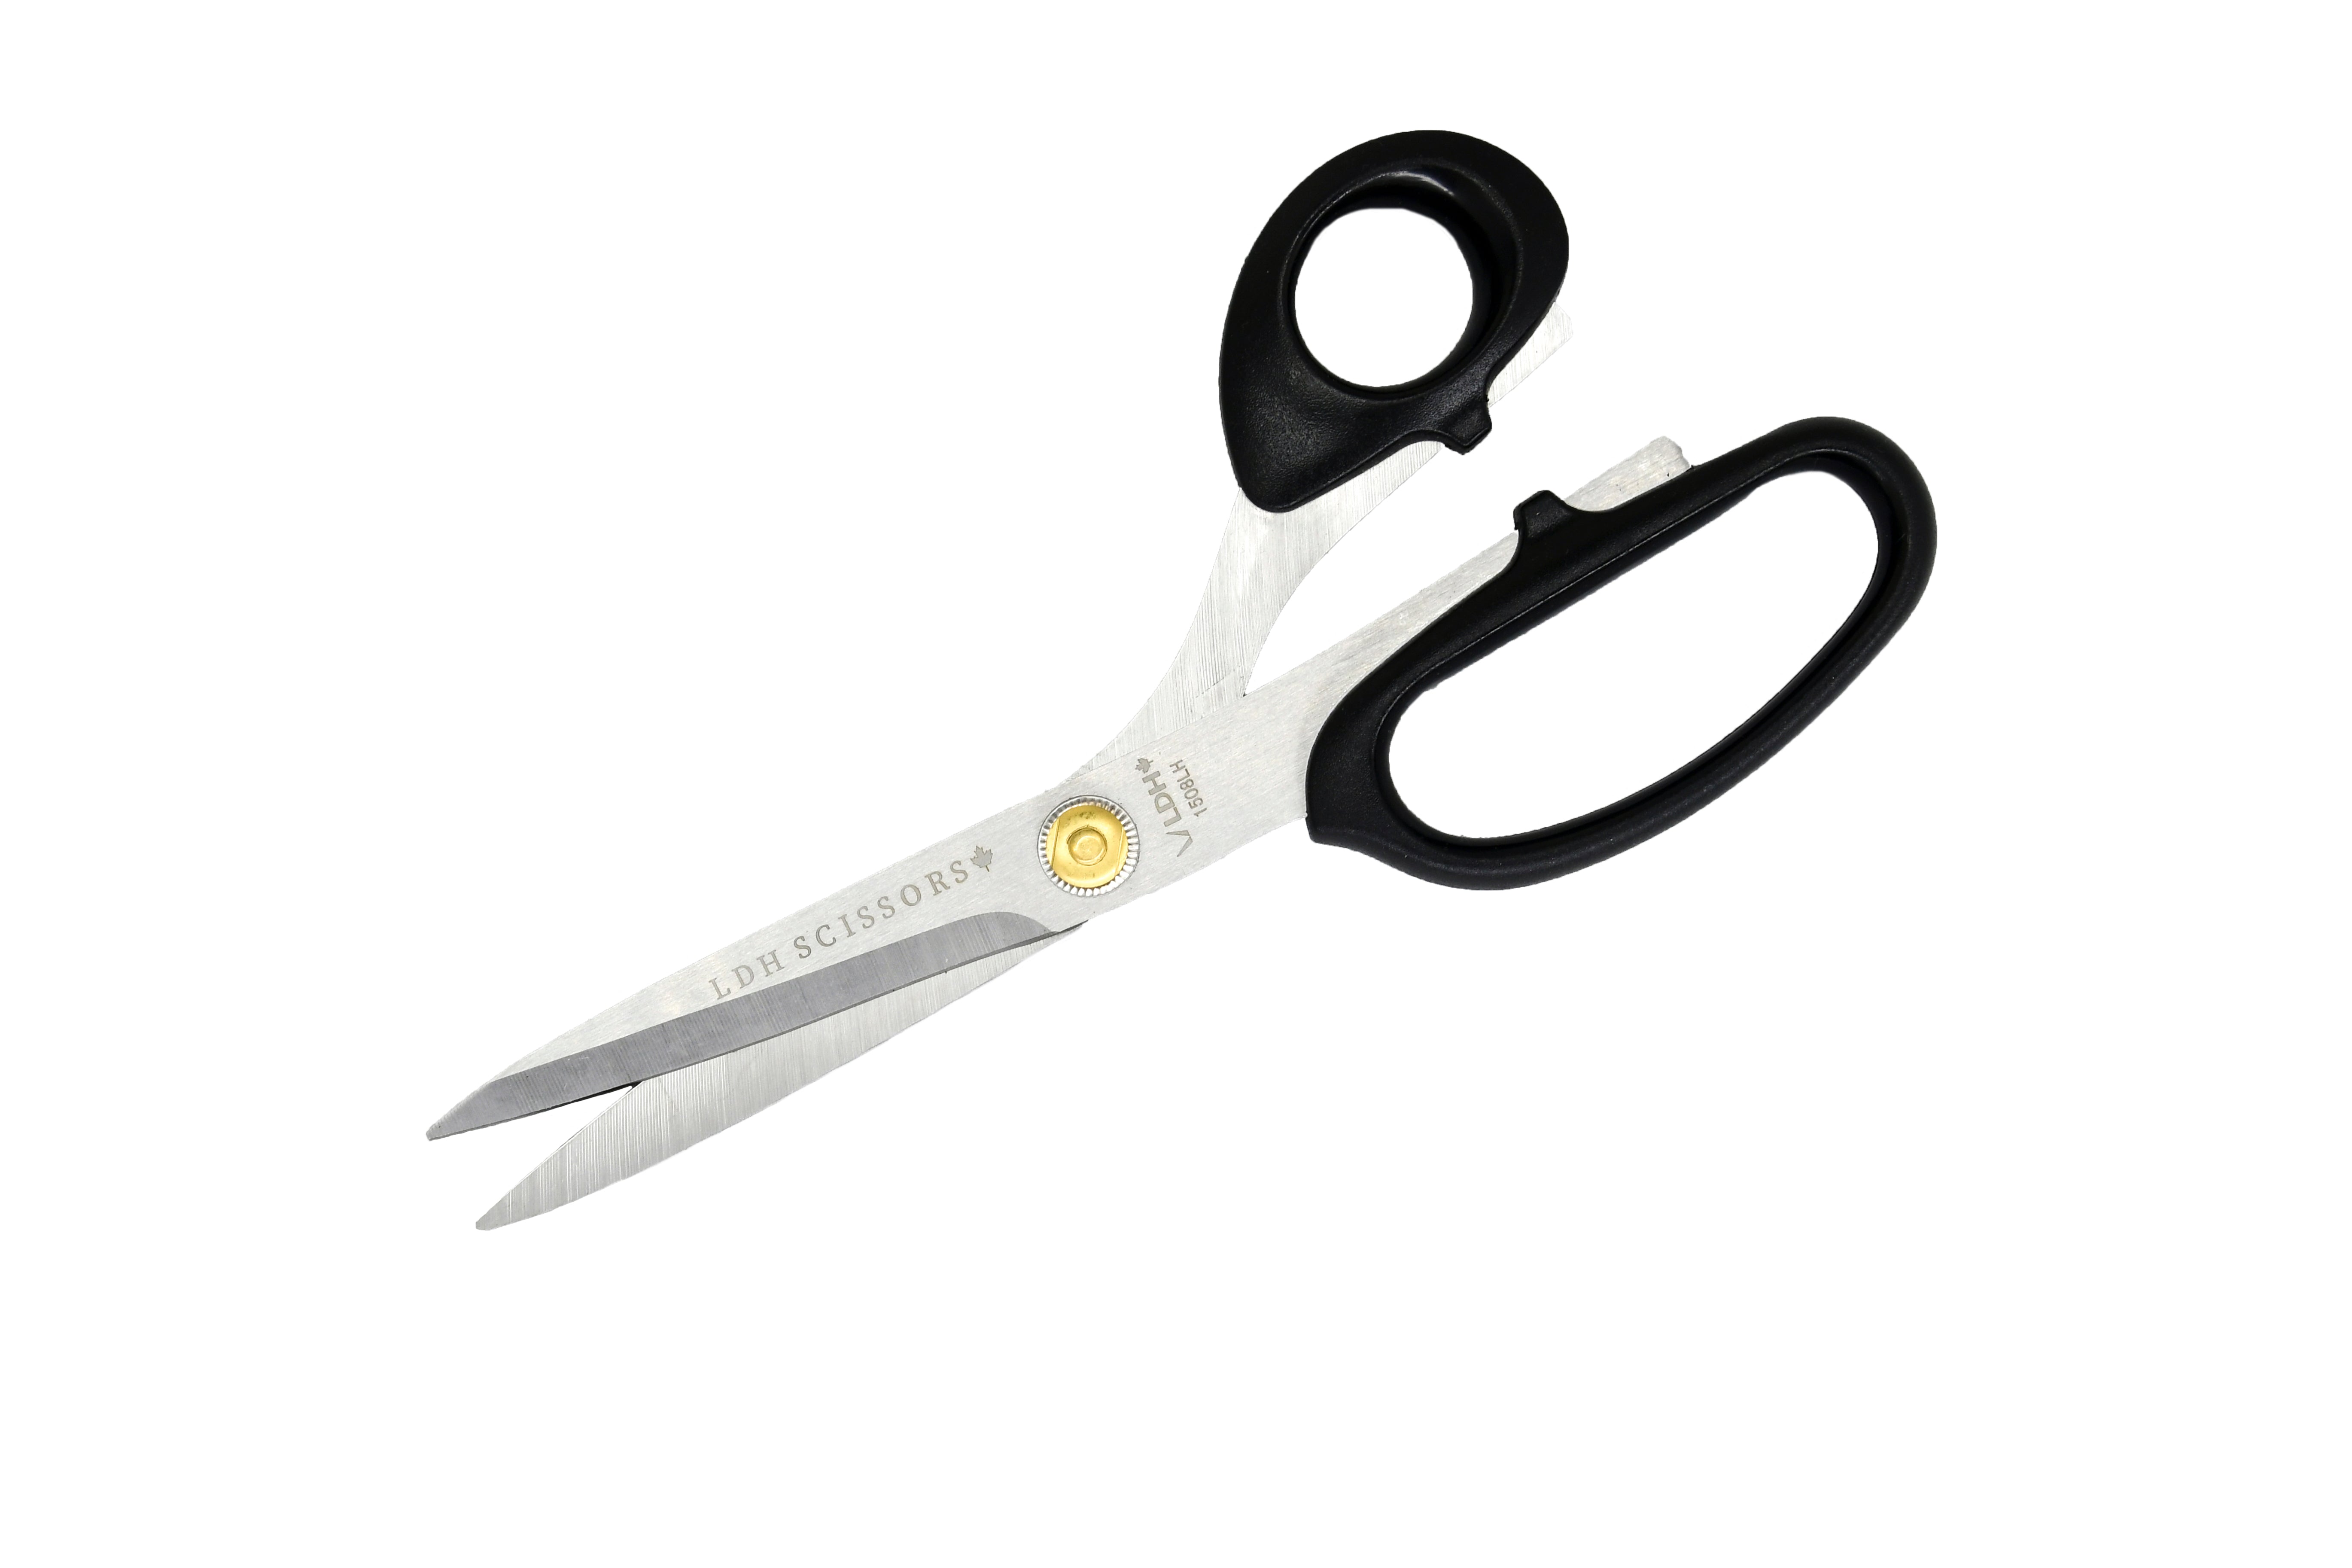 Personalized Left-handed Fabric Scissors With Engraving 10/25 Cm